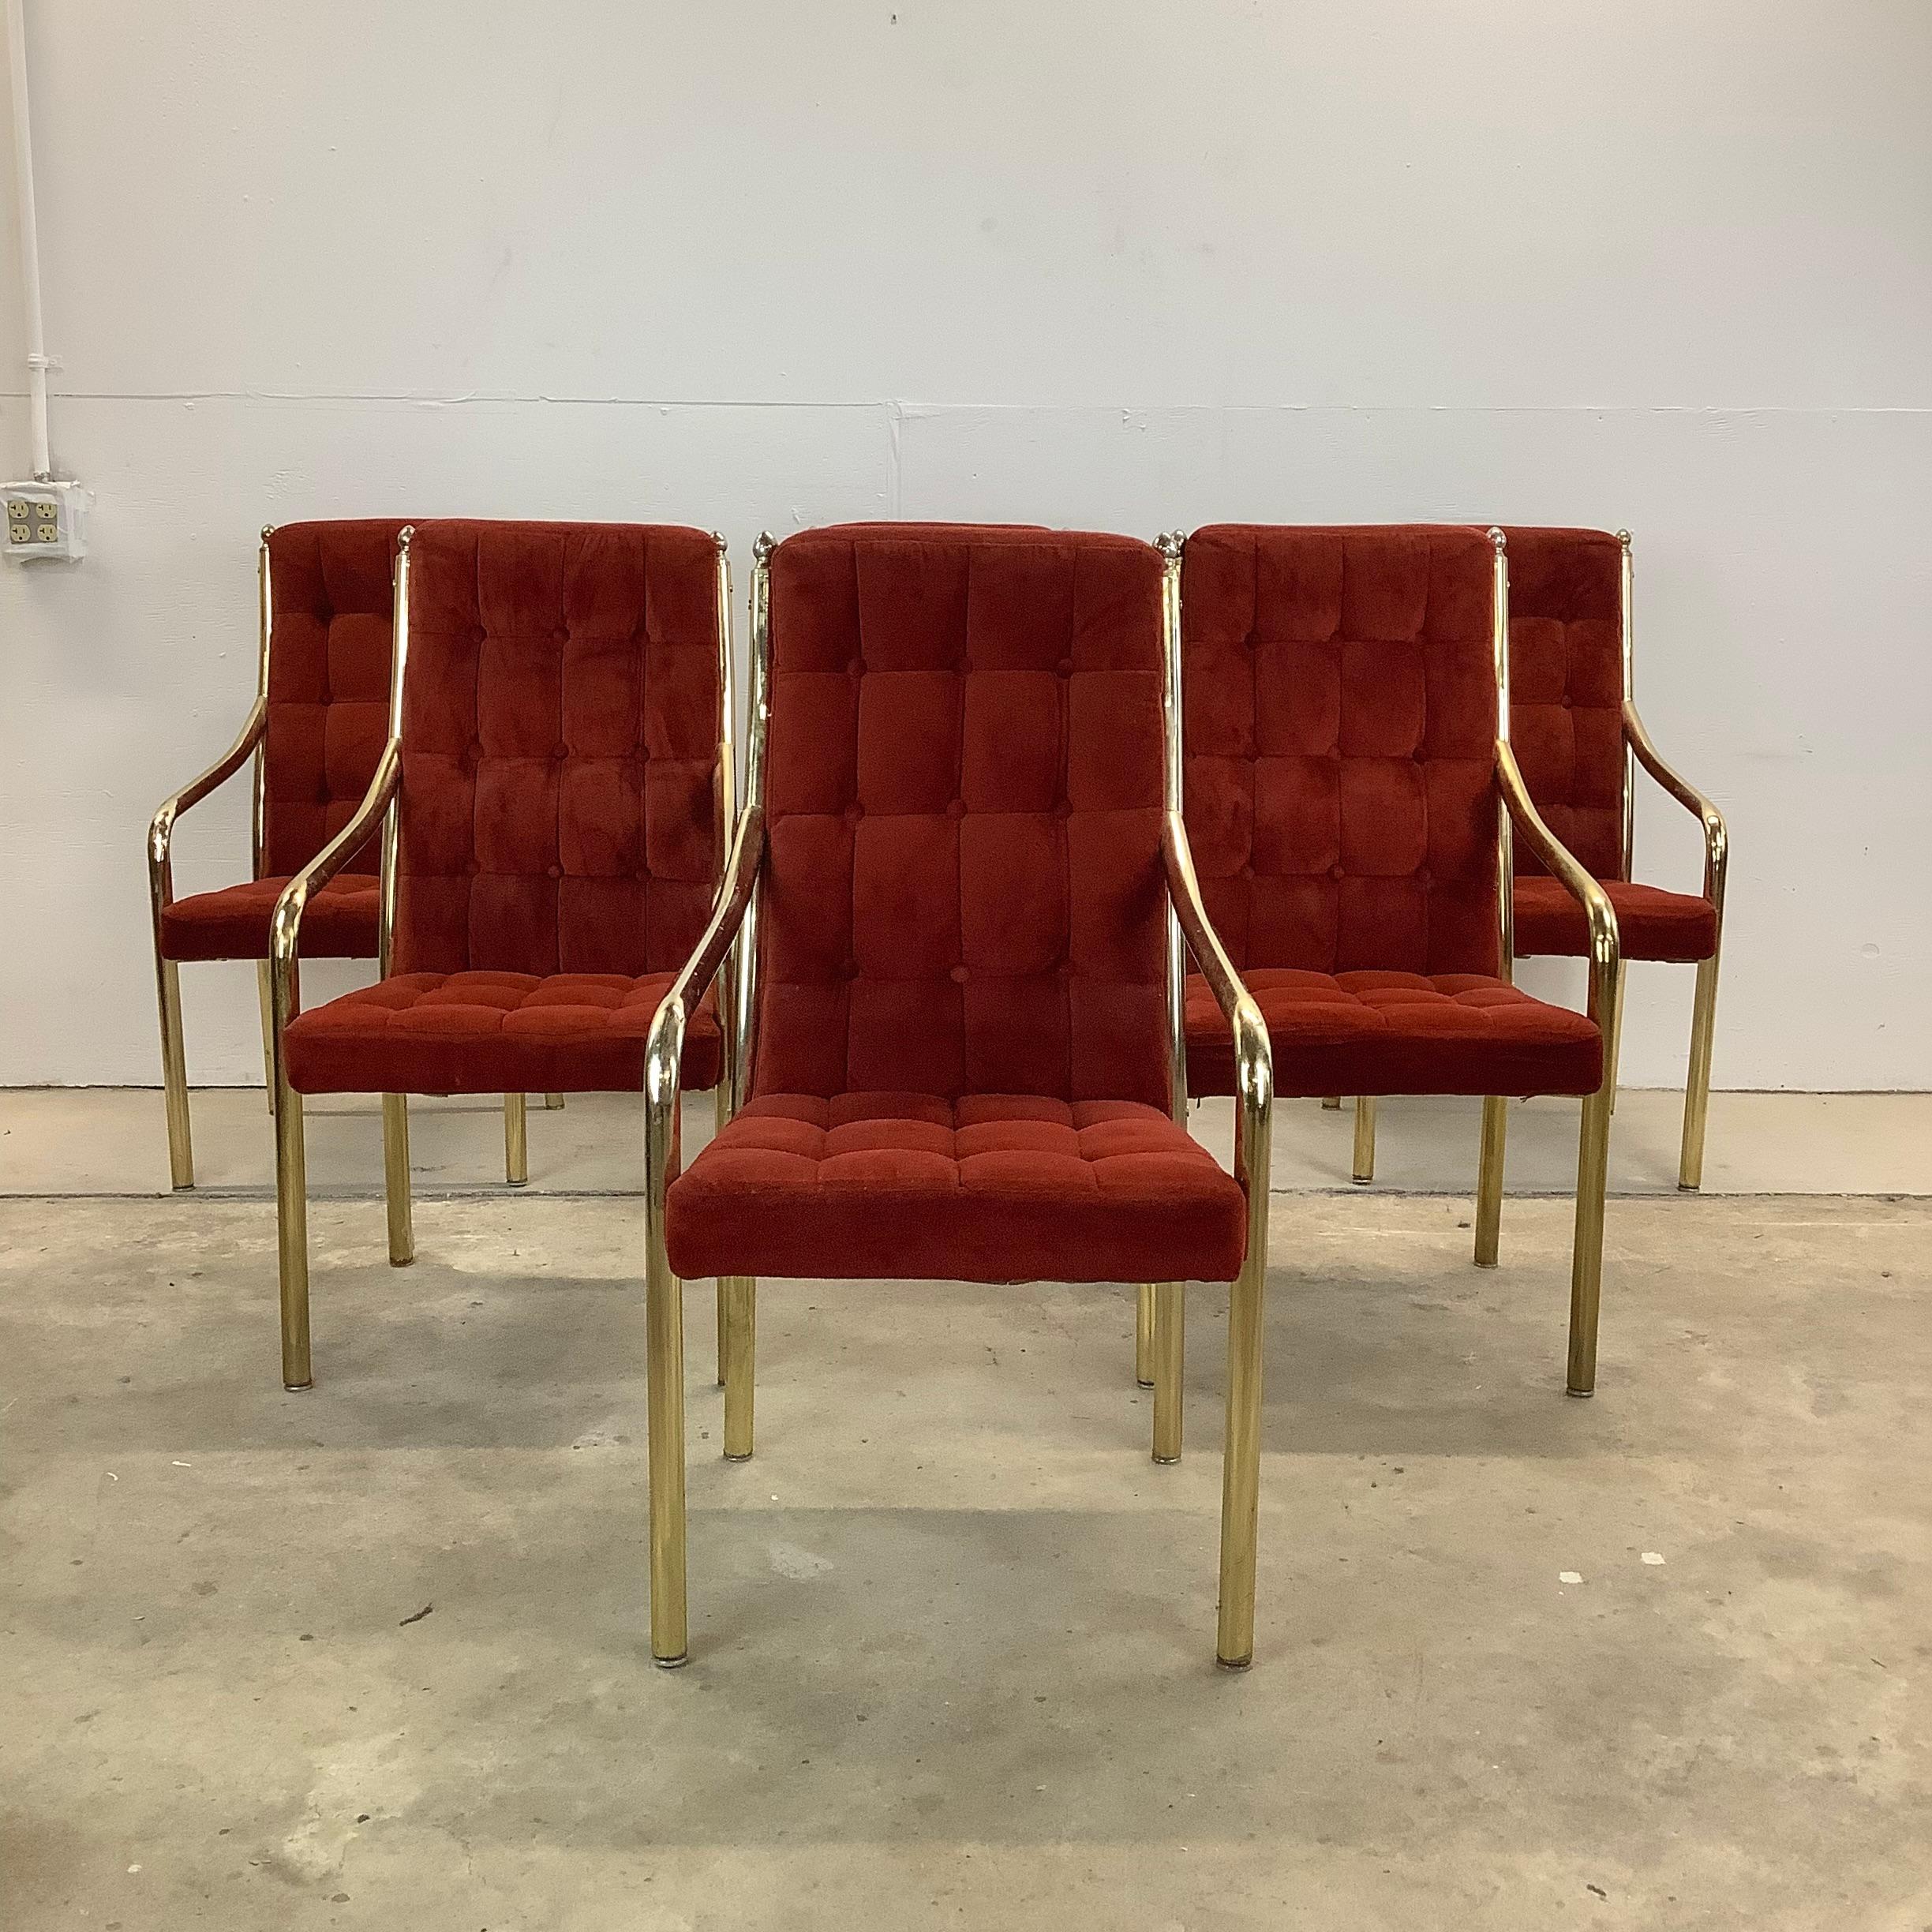 Vintage Modern Highback Dining Chairs by Chromcraft, set of Six In Good Condition For Sale In Trenton, NJ